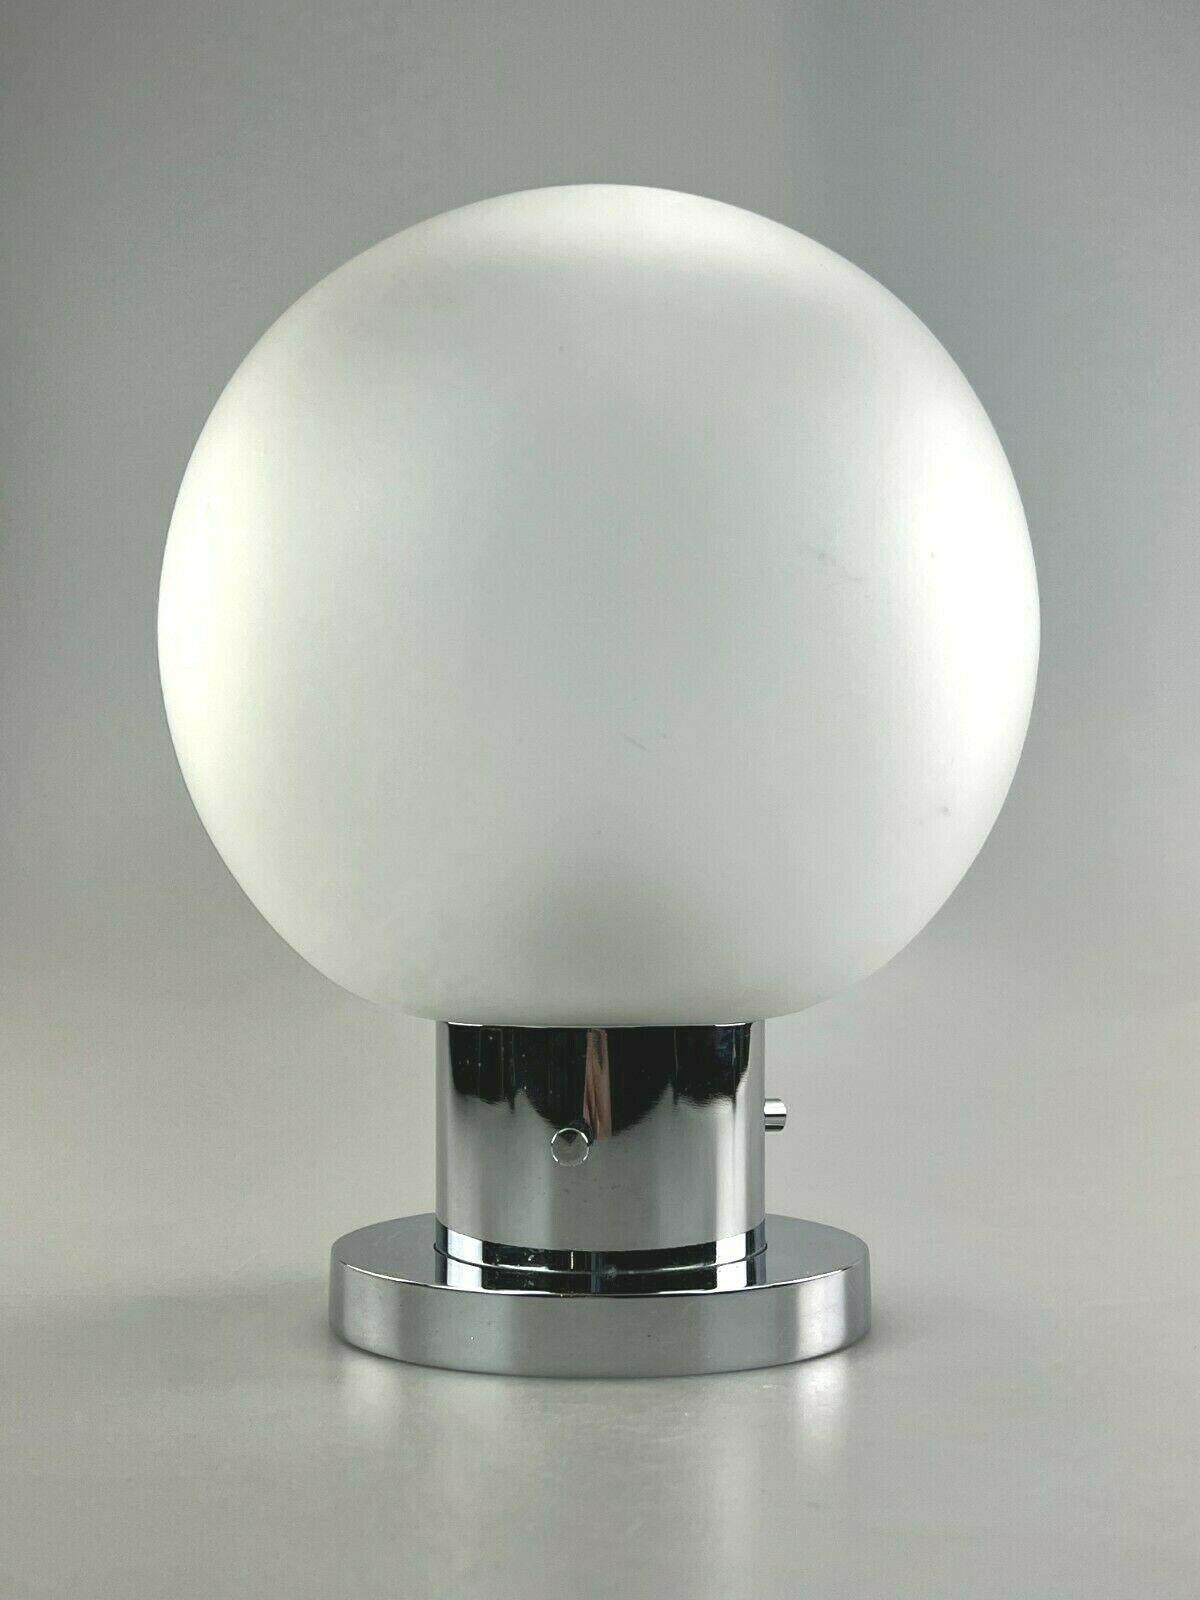 60s 70s Lamp light wall lamp Limburg Plafoniere Space Age Design 60s.

Object: wall lamp

Manufacturer: Glashütte Limburg

Condition: good

Age: around 1960-1970

Dimensions:

Diameter = 24cm
Height = 32cm

Other notes:

The